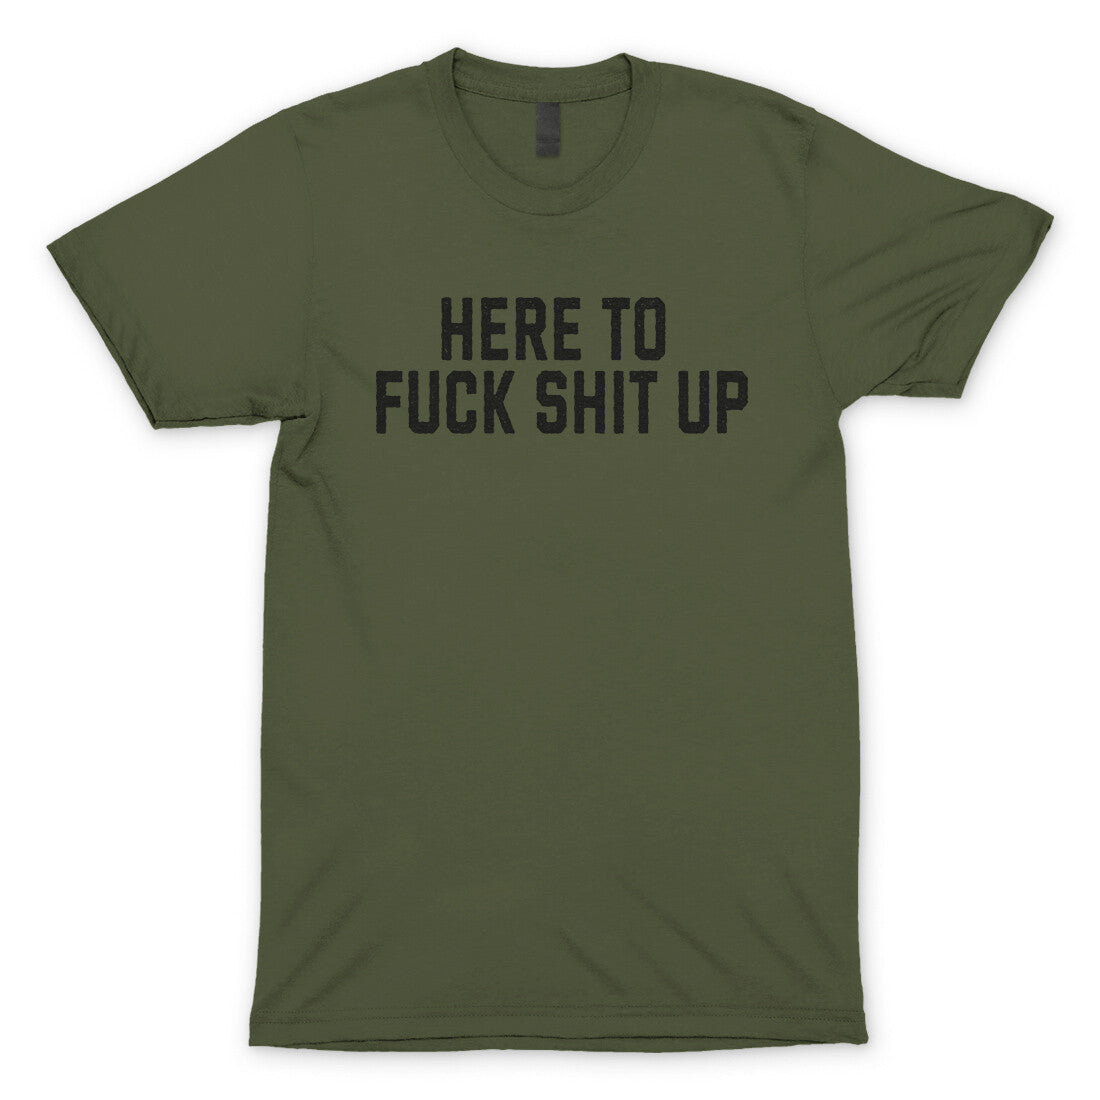 Here to Fuck Shit Up in Military Green Color